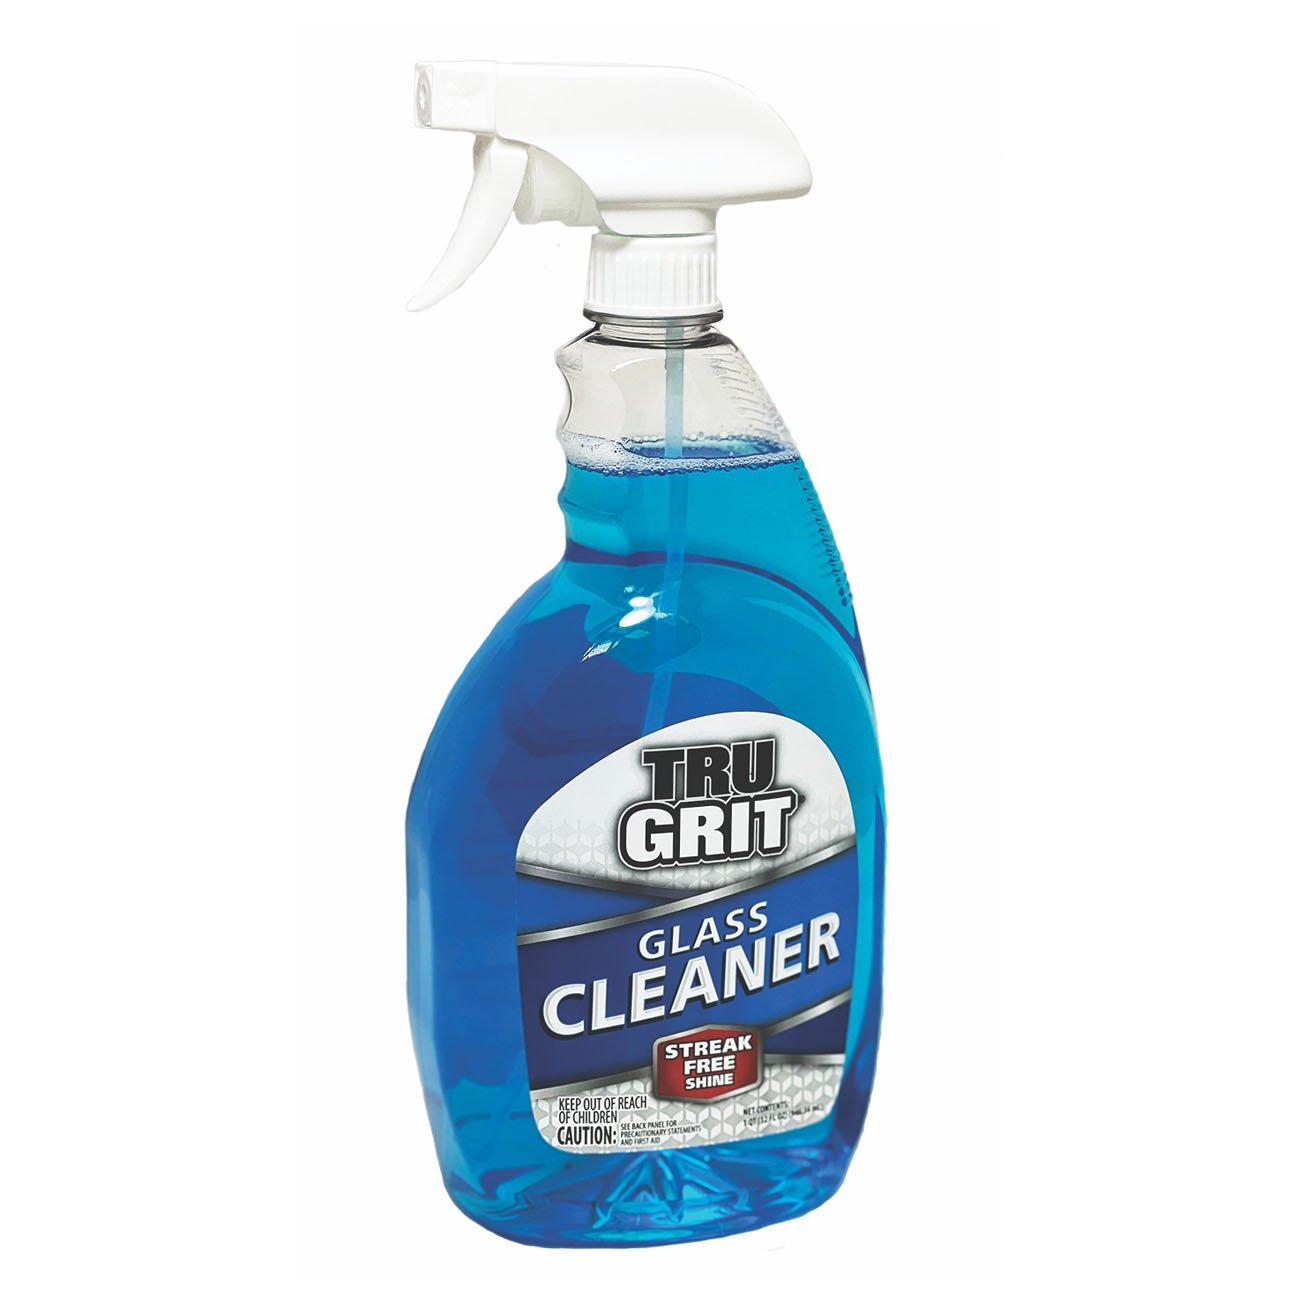 H-E-B Tru Grit Glass Cleaner - Shop All Purpose Cleaners at H-E-B